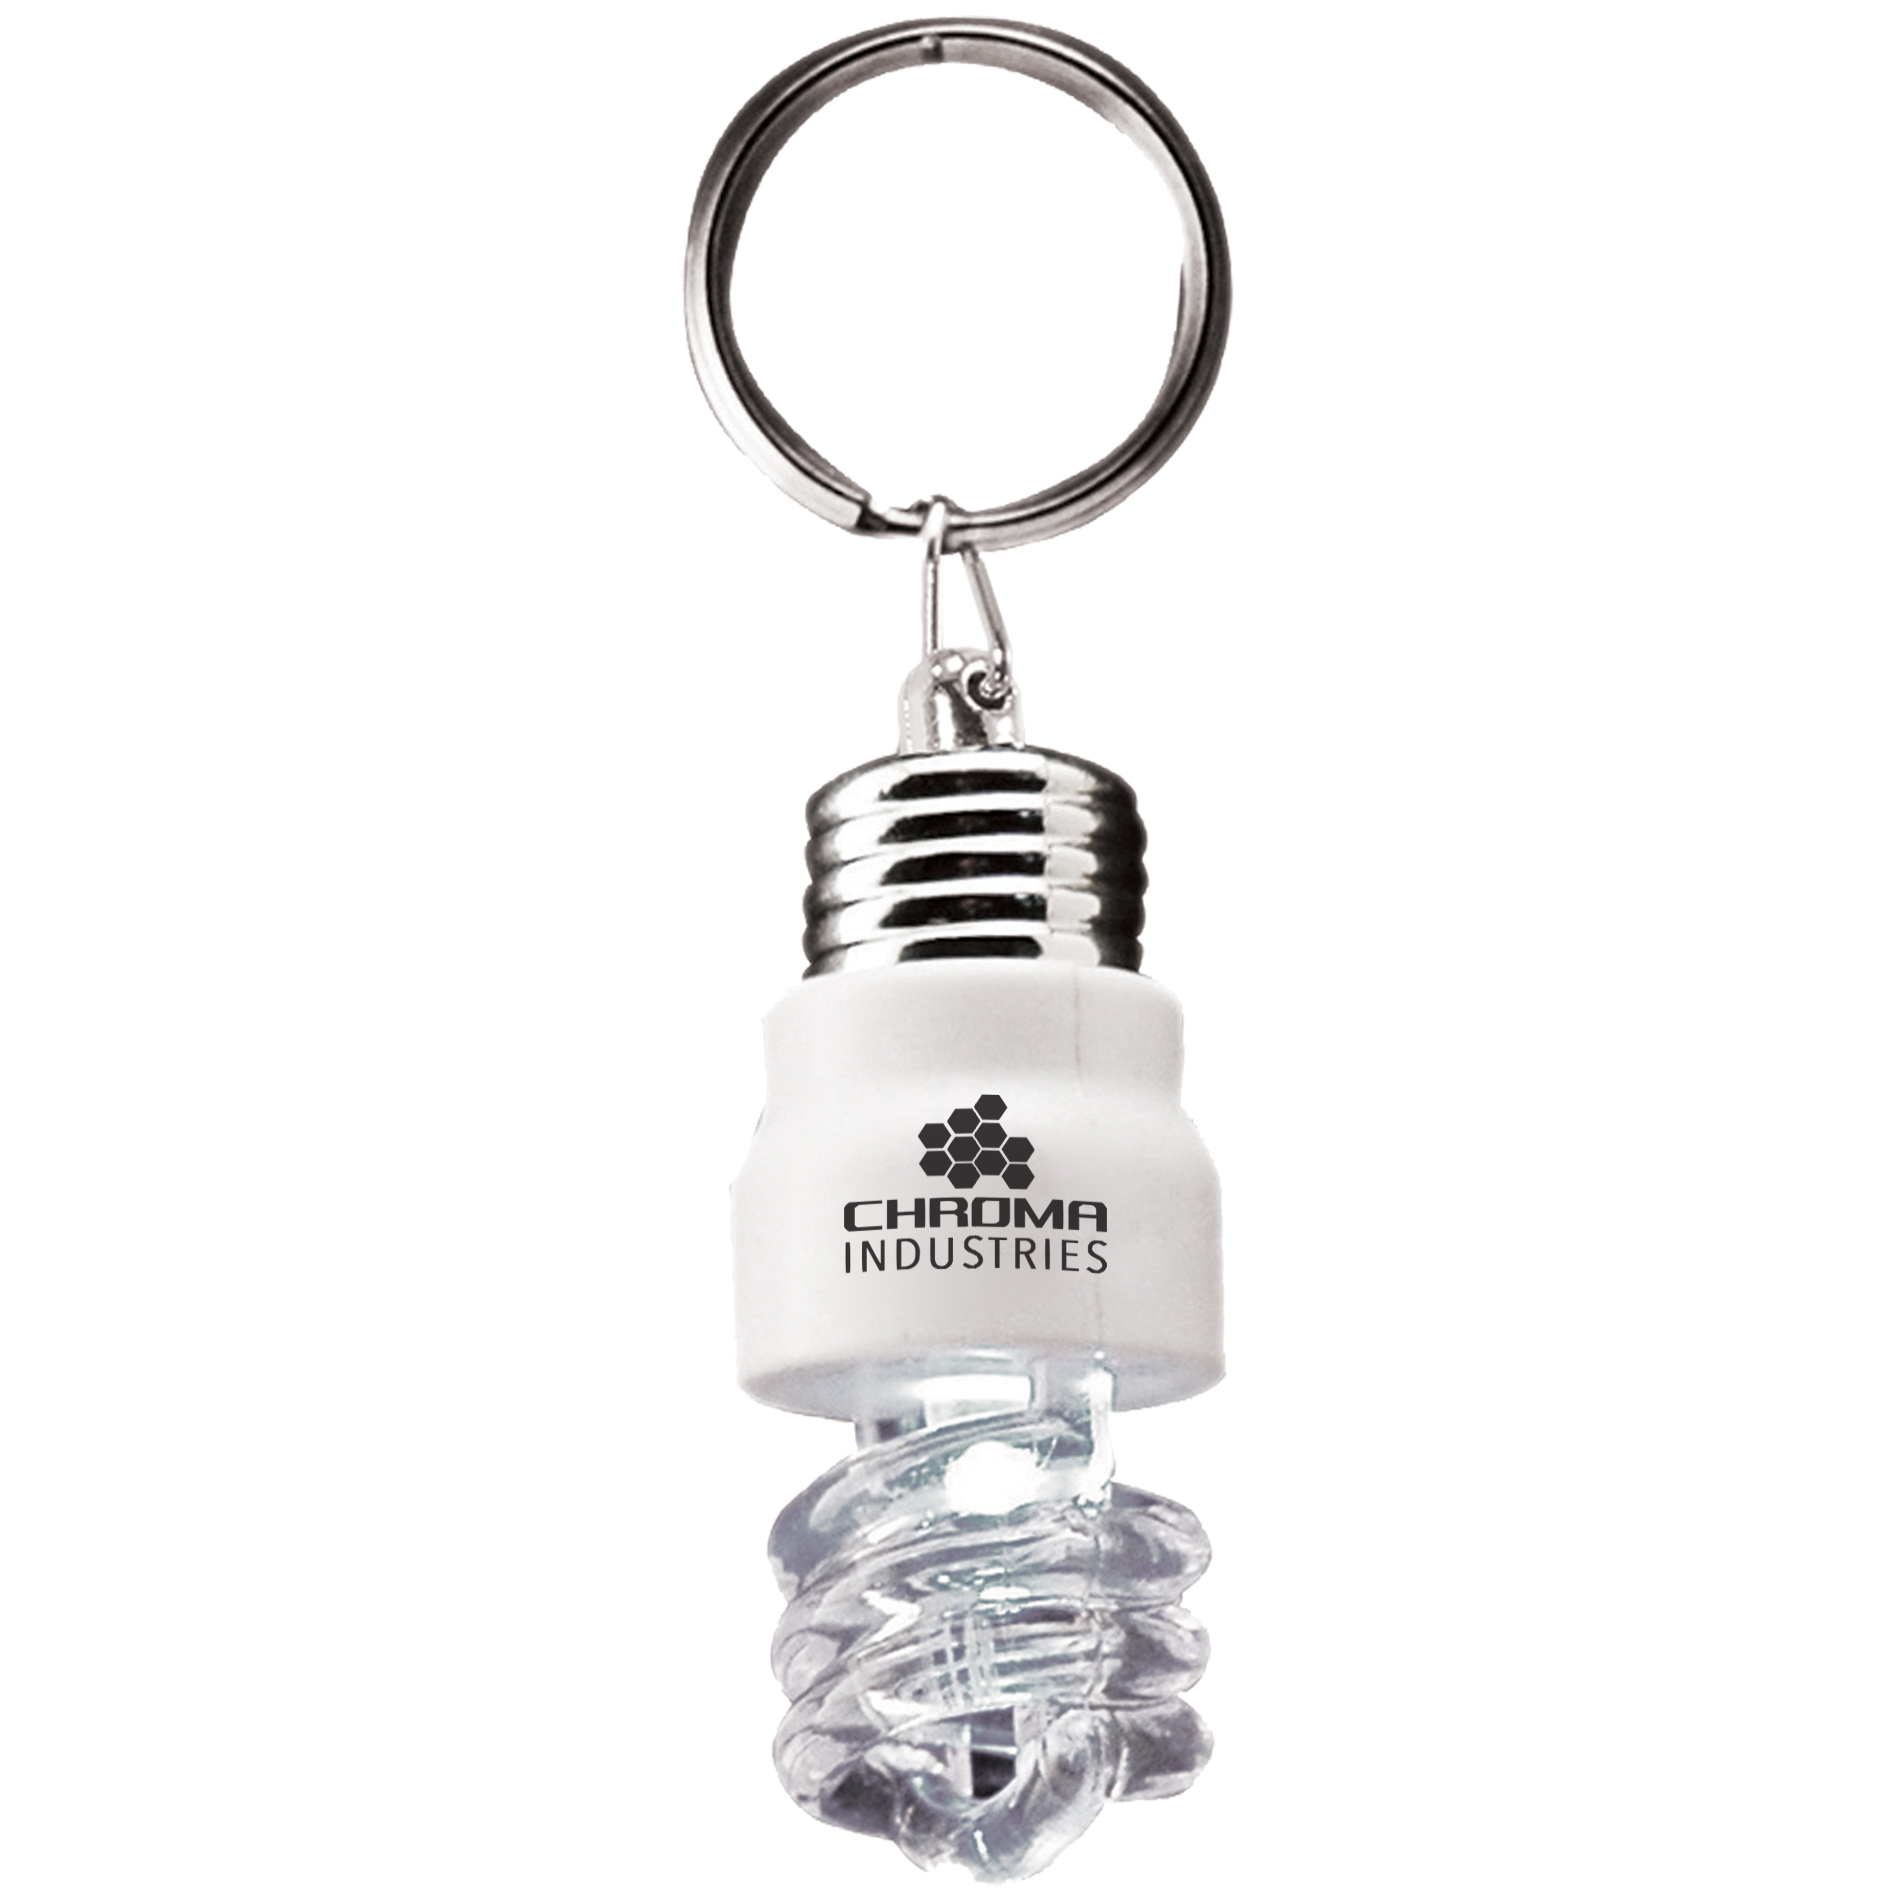 Promotional Light Up Car Key Chain